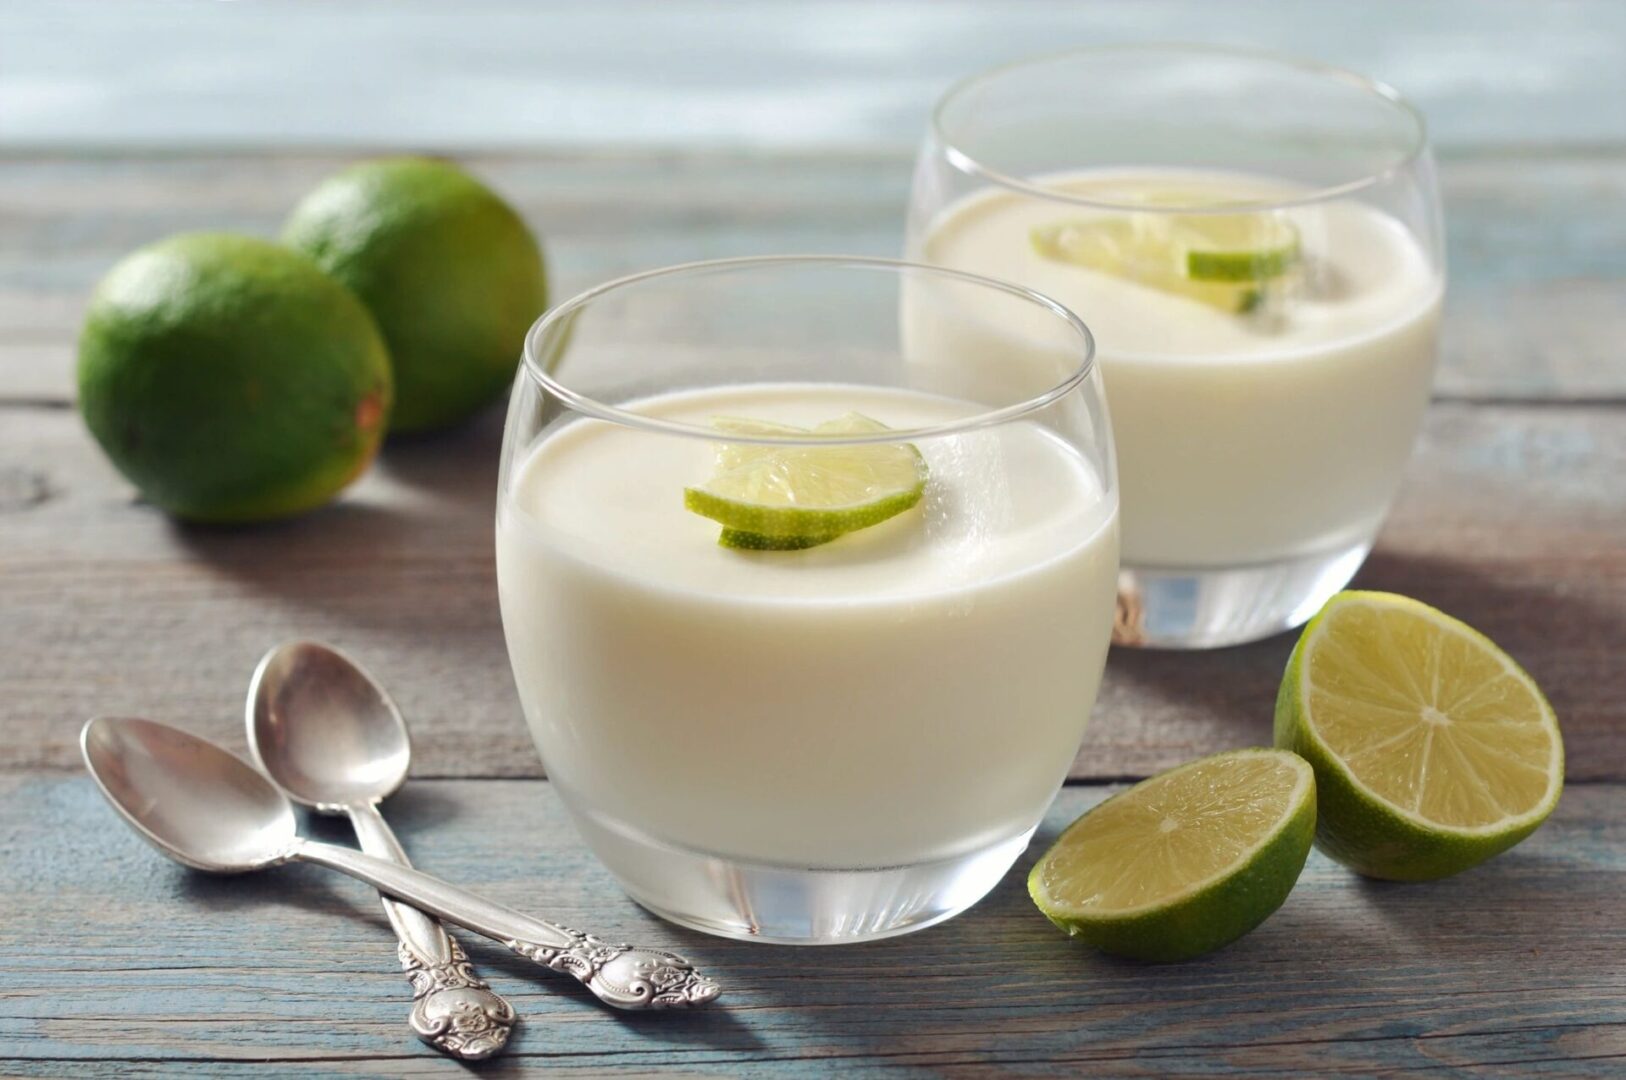 Two glasses of milk with lime slices on top.